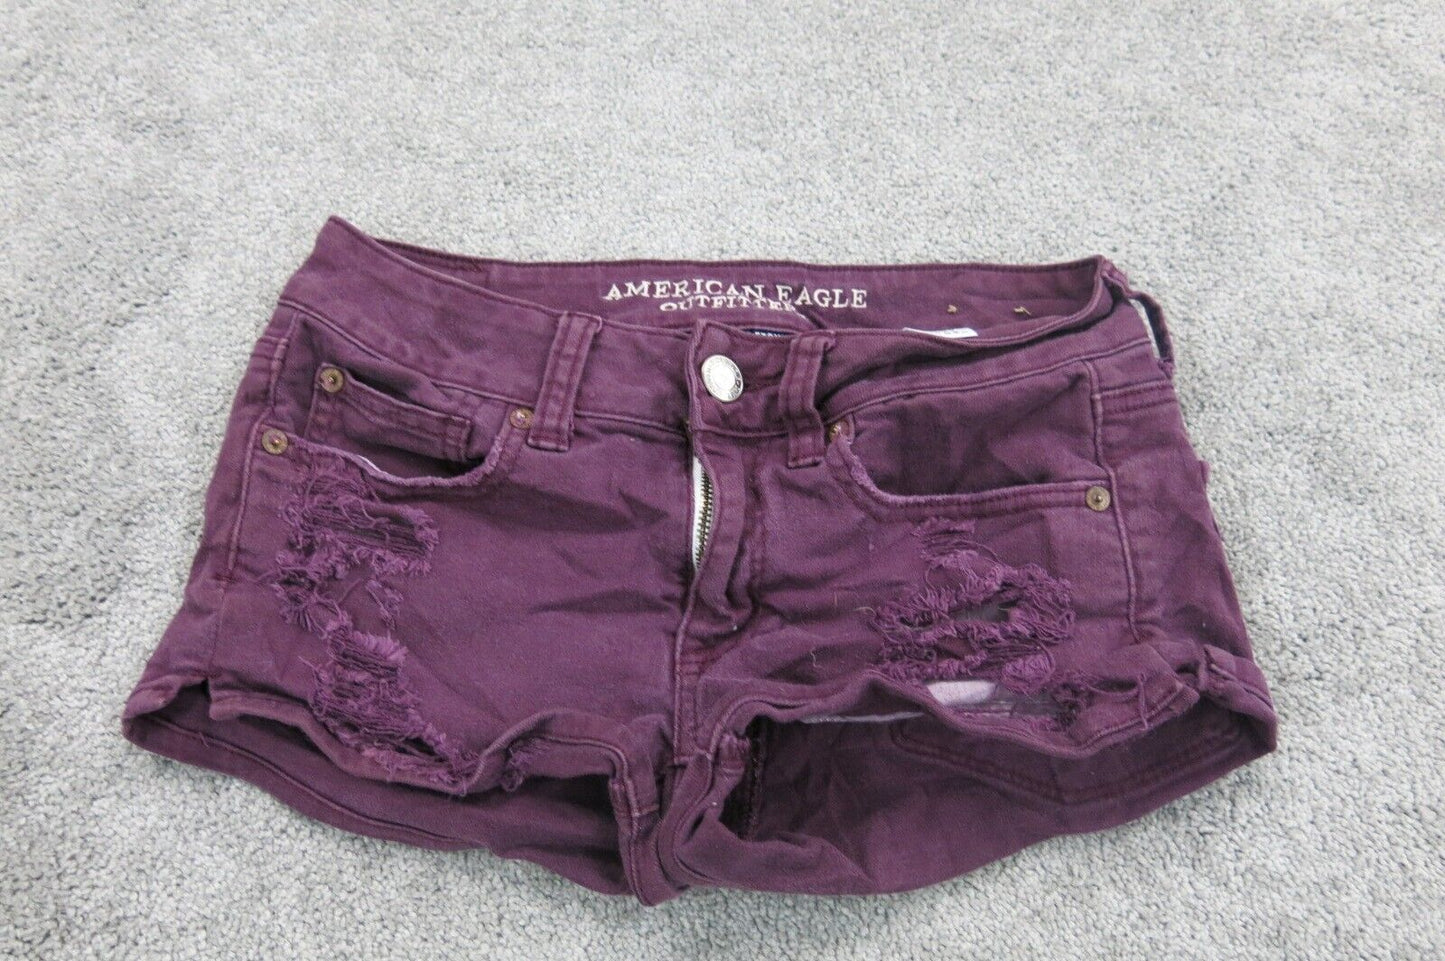 American Eagle Womens Cut Off Shorts Low Rise Distressed Pockets Maroon Size 2